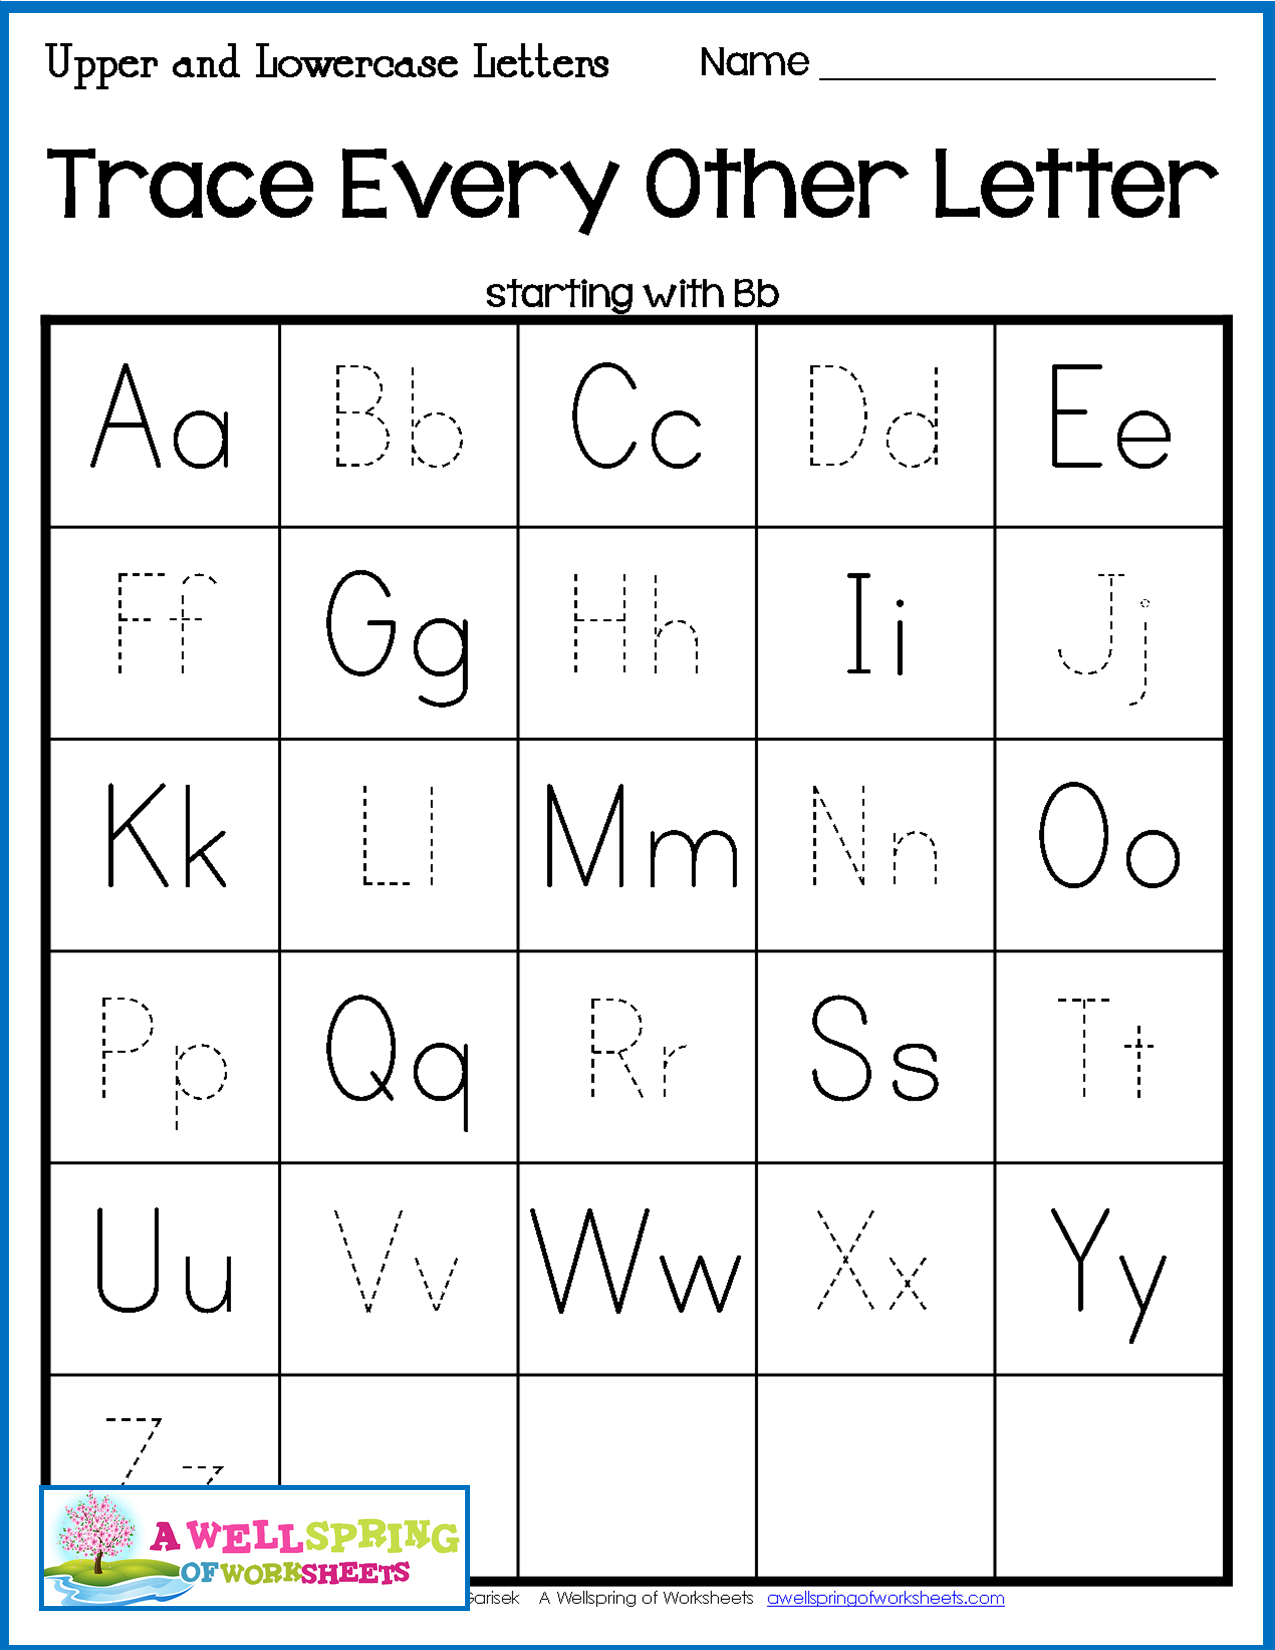 Alphabet Tracing Worksheets - Uppercase &amp;amp; Lowercase Letters pertaining to Tracing Upper And Lowercase Letters